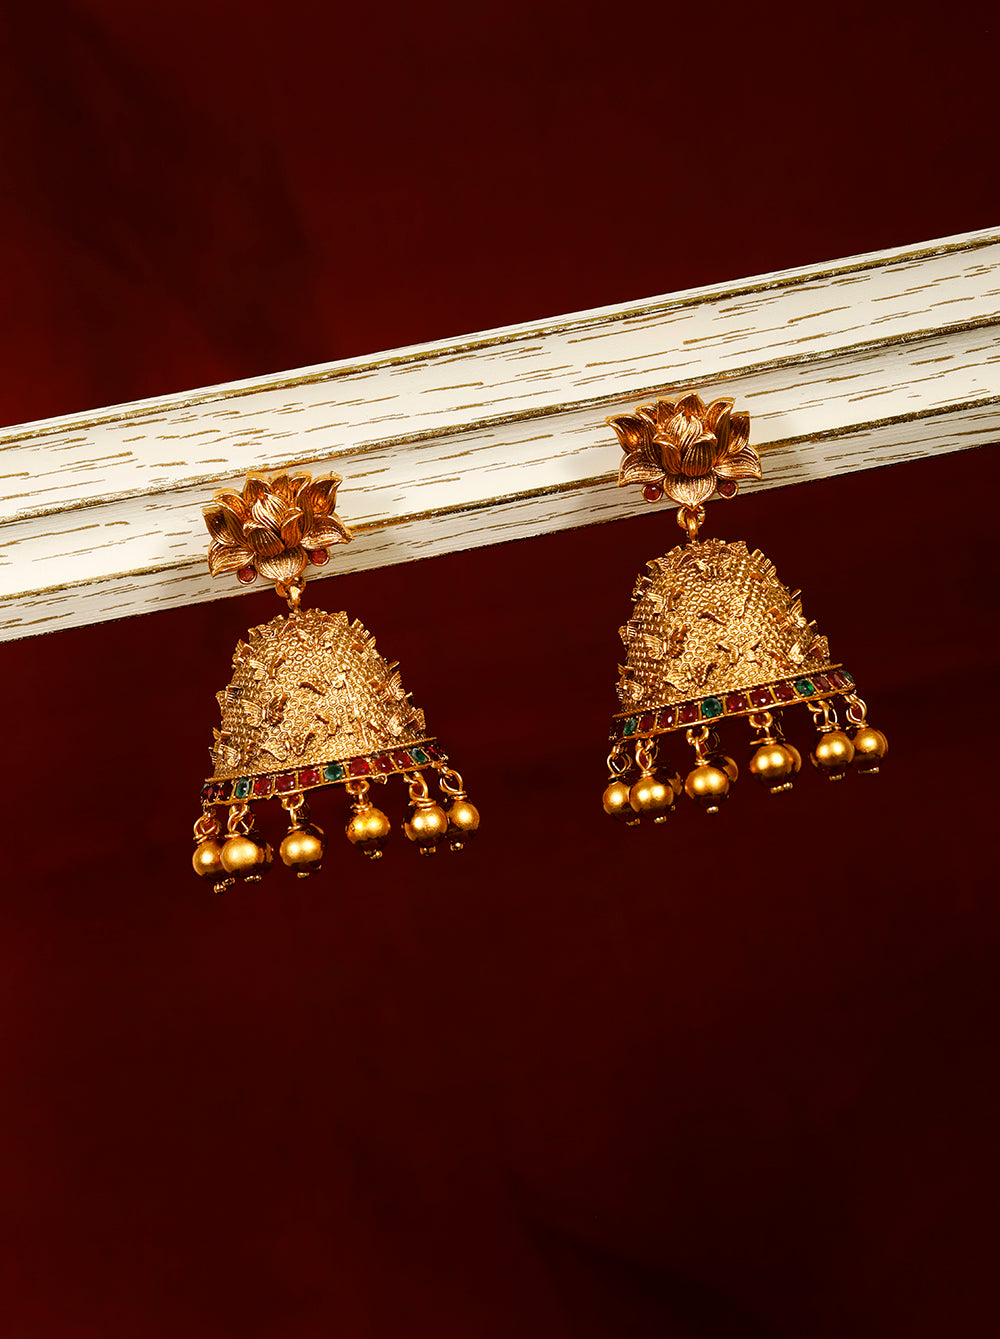 Kemp Stones Studded Gold Plated Butterfly Shaped Jhumka Earrings